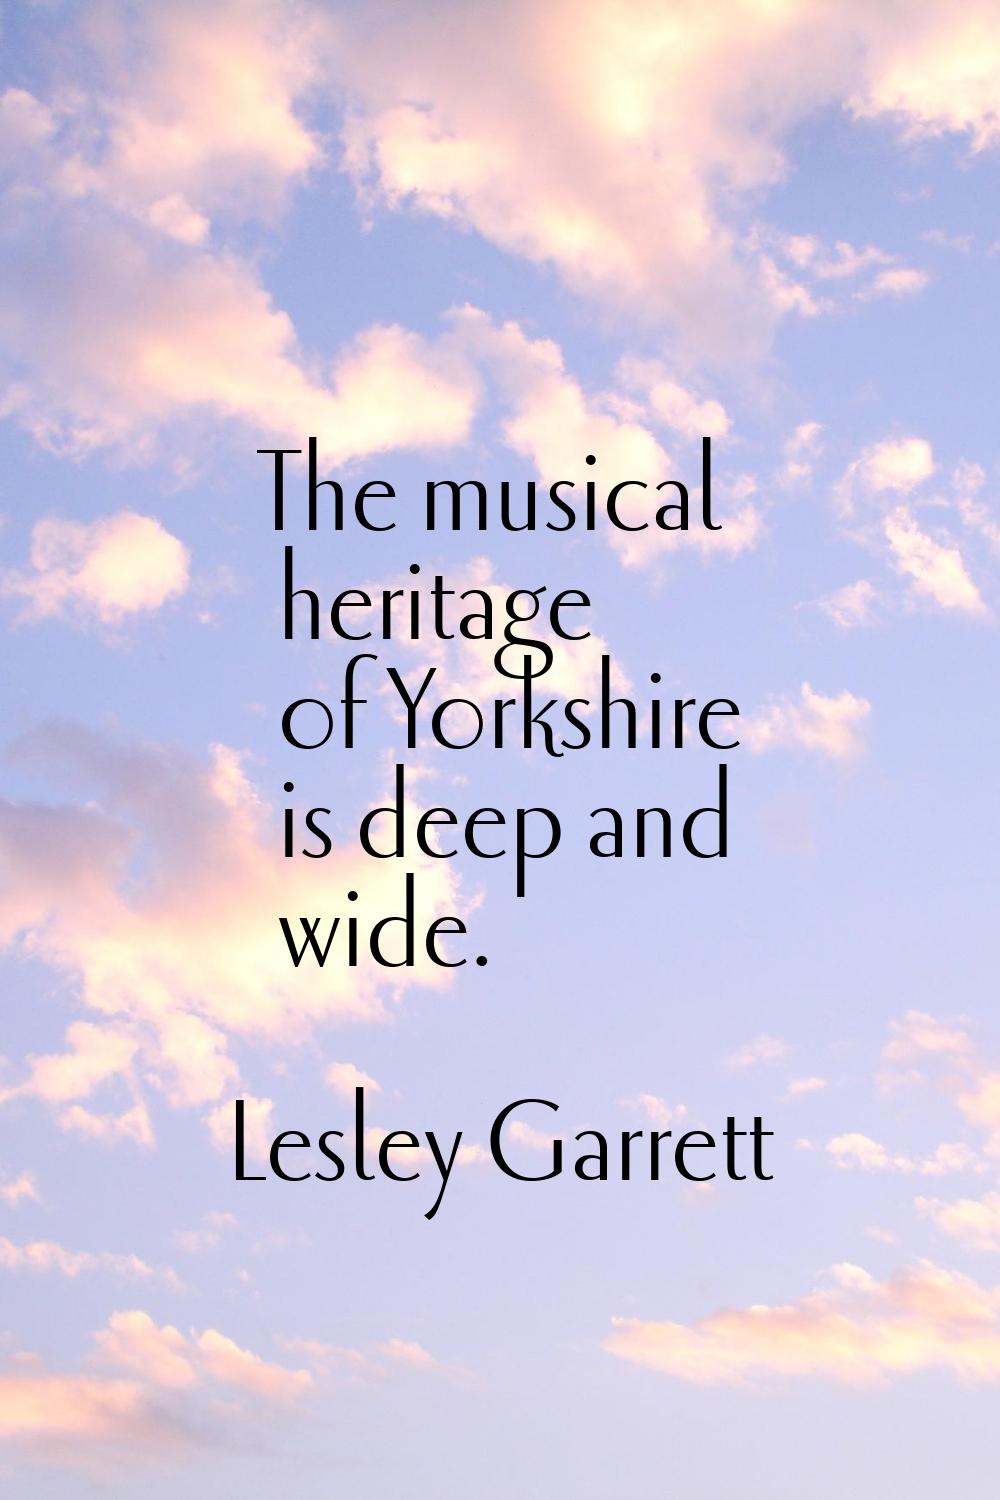 The musical heritage of Yorkshire is deep and wide.